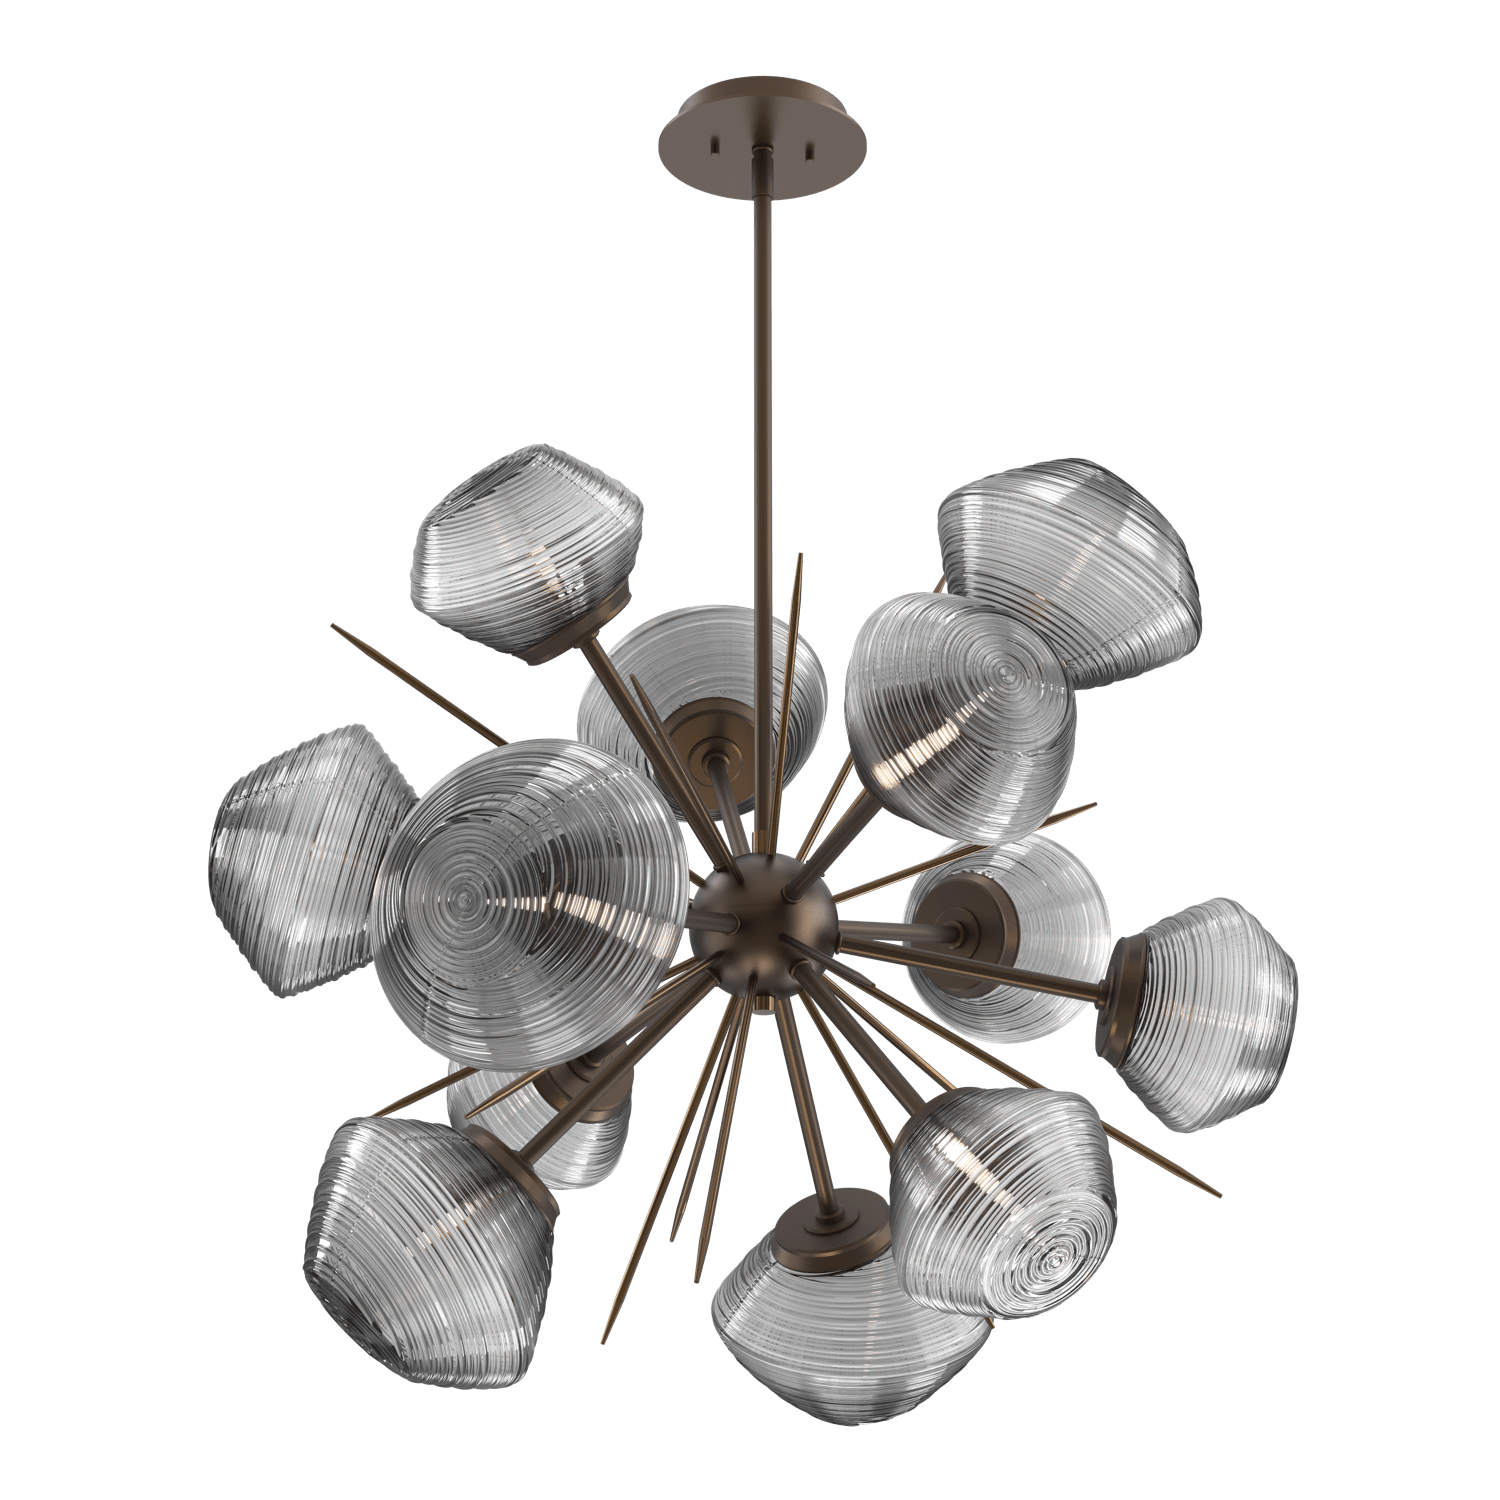 CHB0089-0G-FB-S-Hammerton-Studio-Mesa-36-inch-starburst-chandelier-with-flat-bronze-finish-and-smoke-blown-glass-shades-and-LED-lamping